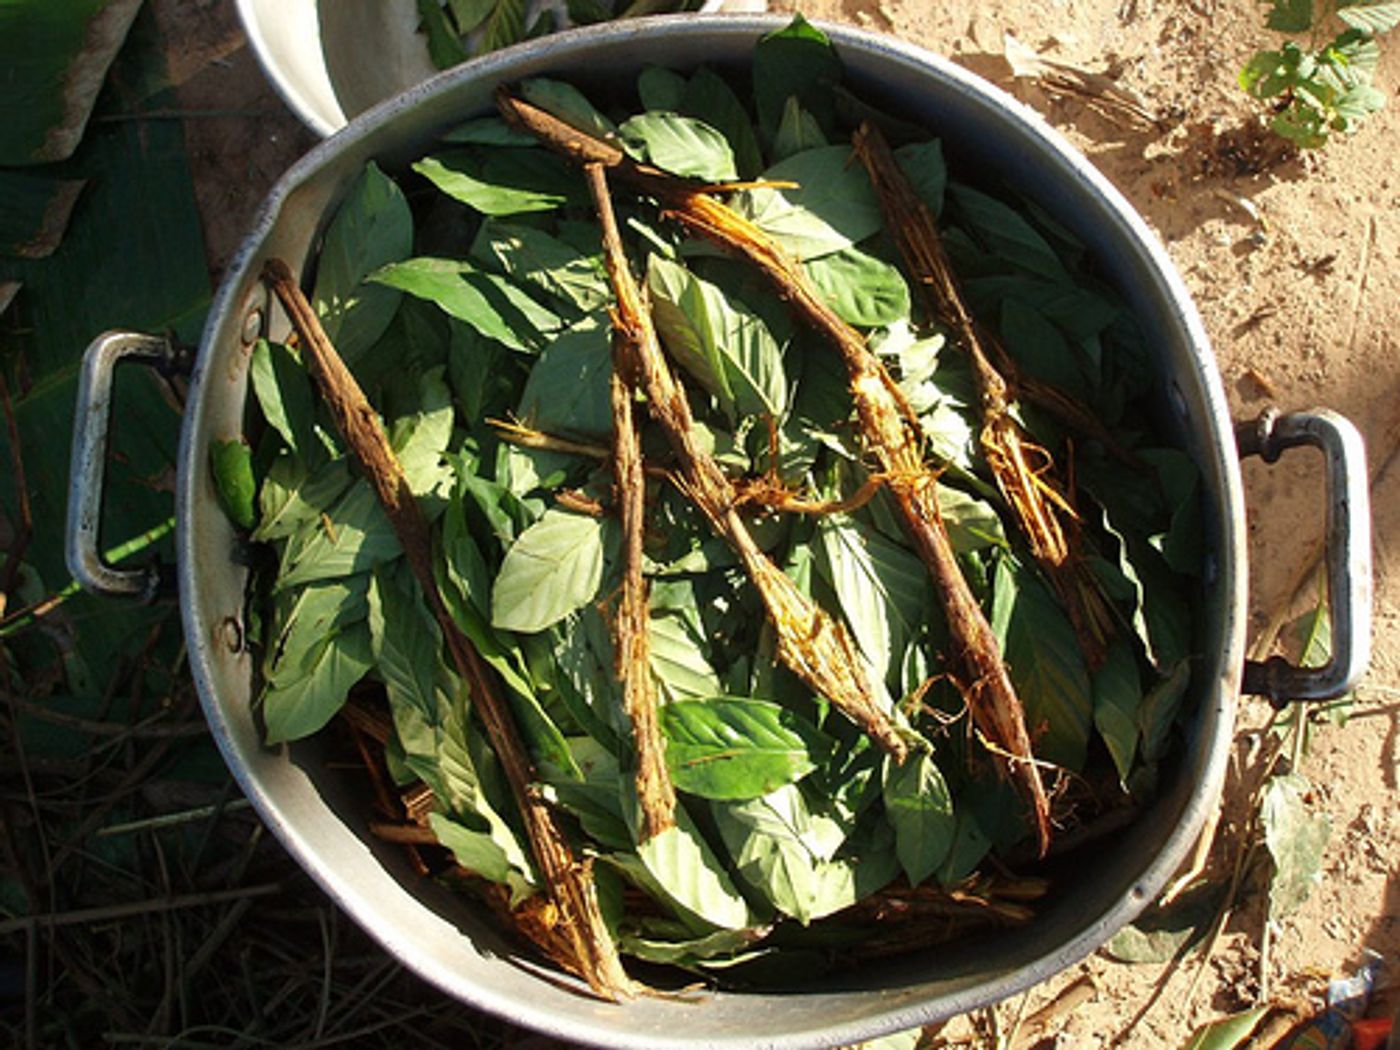 Ayahuasca and chacruna being brewed / Credit Wikimedia Commons/Awkipuma